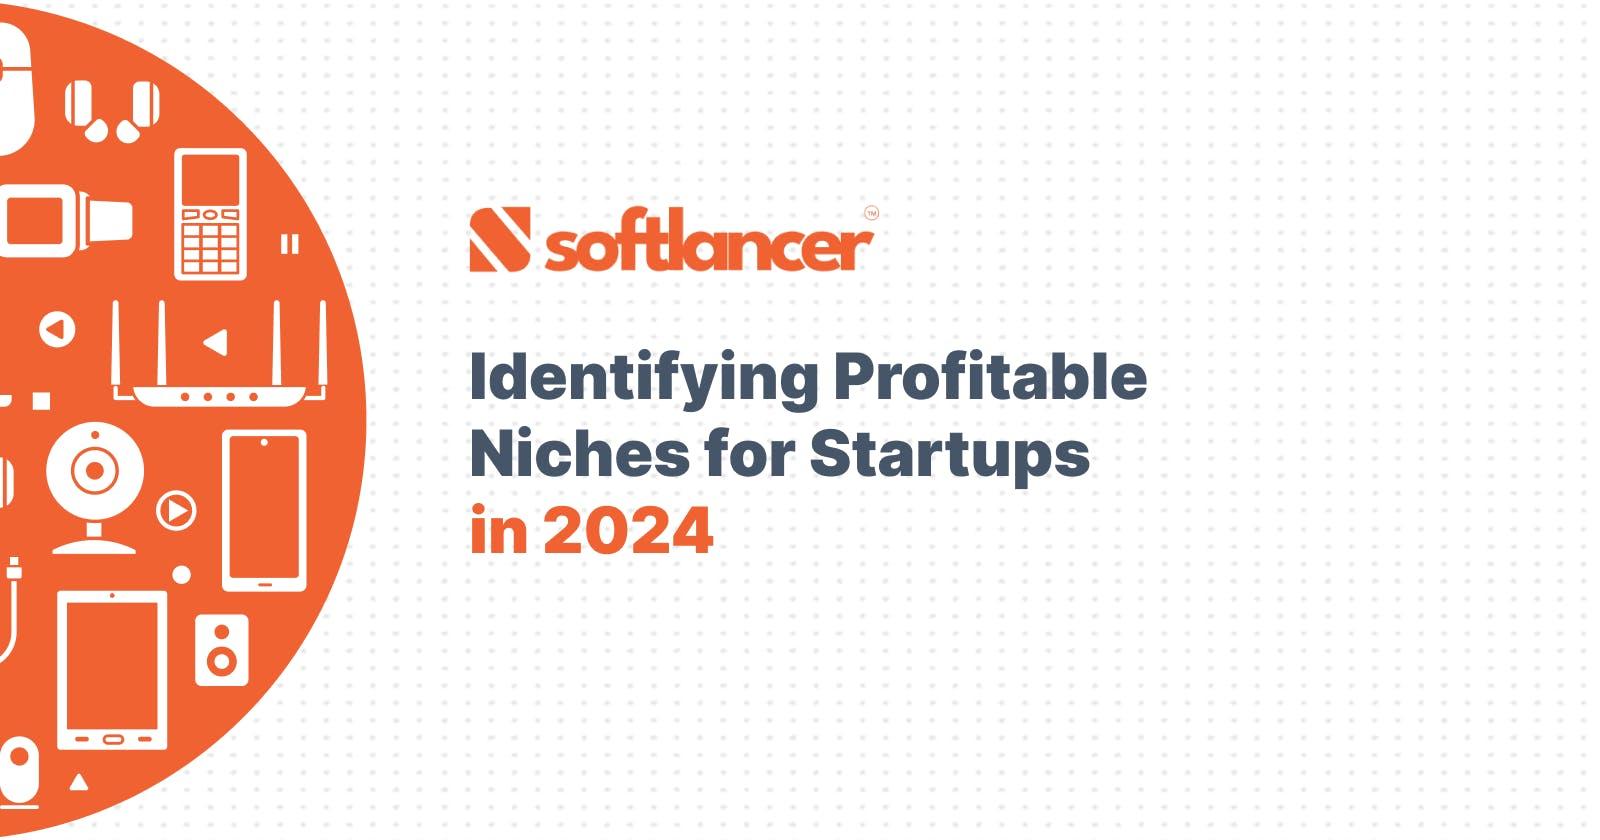 Identifying Profitable Niches for Startups in 2024